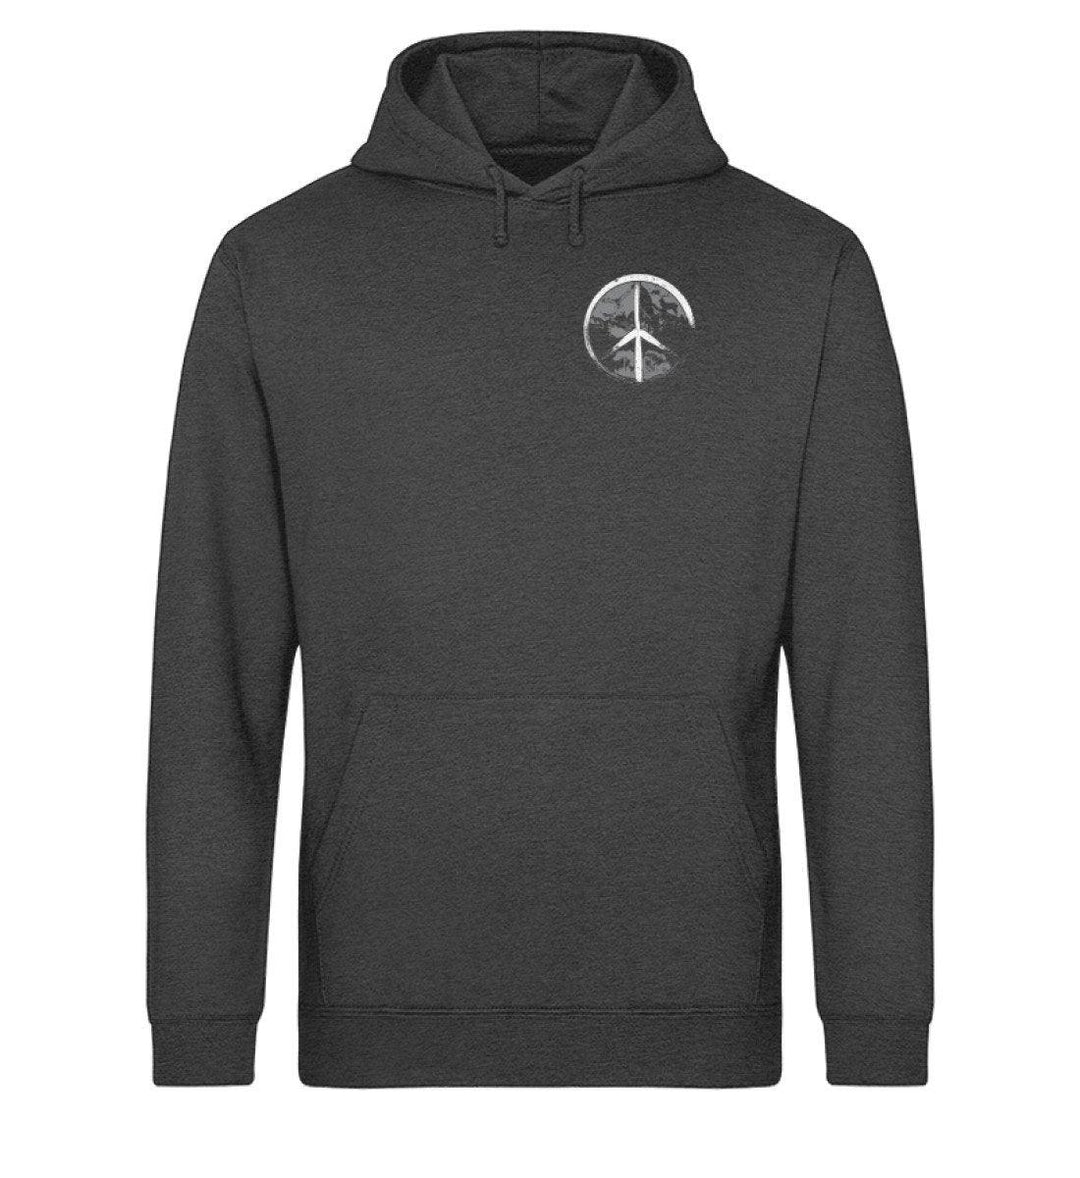 Peace of the forest - Unisex Basic Bio Hoodie